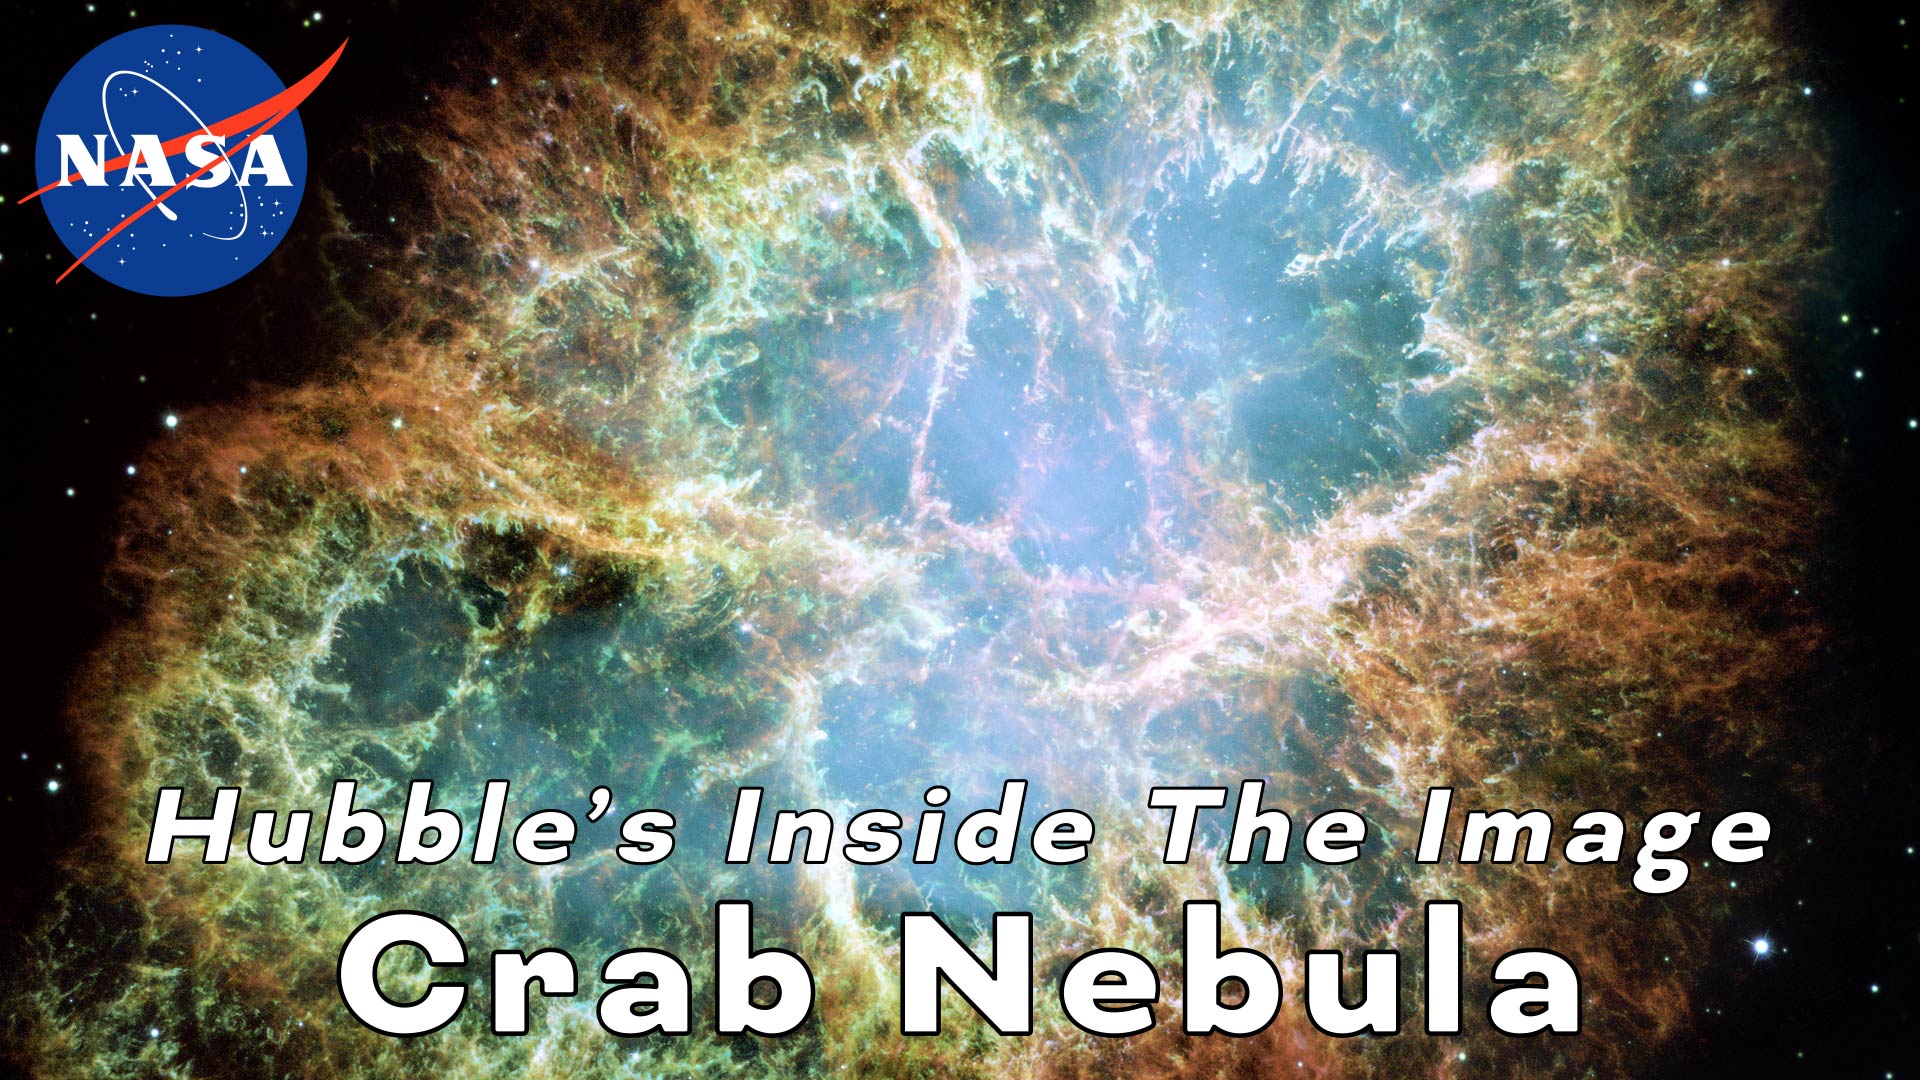 Preview Image for Hubble’s Inside The Image: Crab Nebula